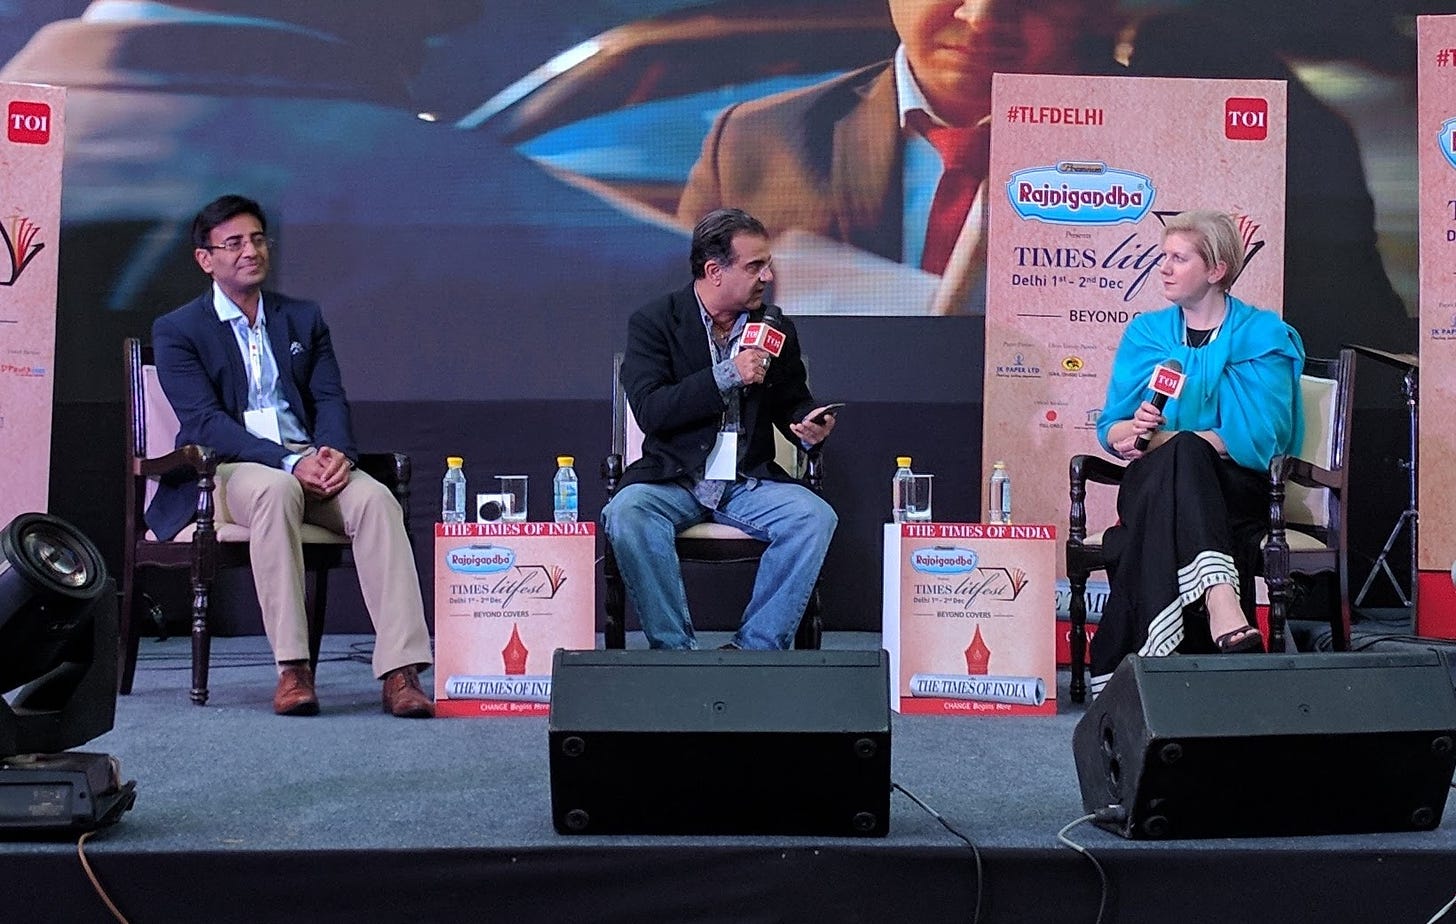 https://upload.wikimedia.org/wikipedia/commons/d/d9/Clare_Mackintosh_at_Times_LitFest_in_New_Delhi_with_IPS_officer_Amit_Lodha_on_left.jpg